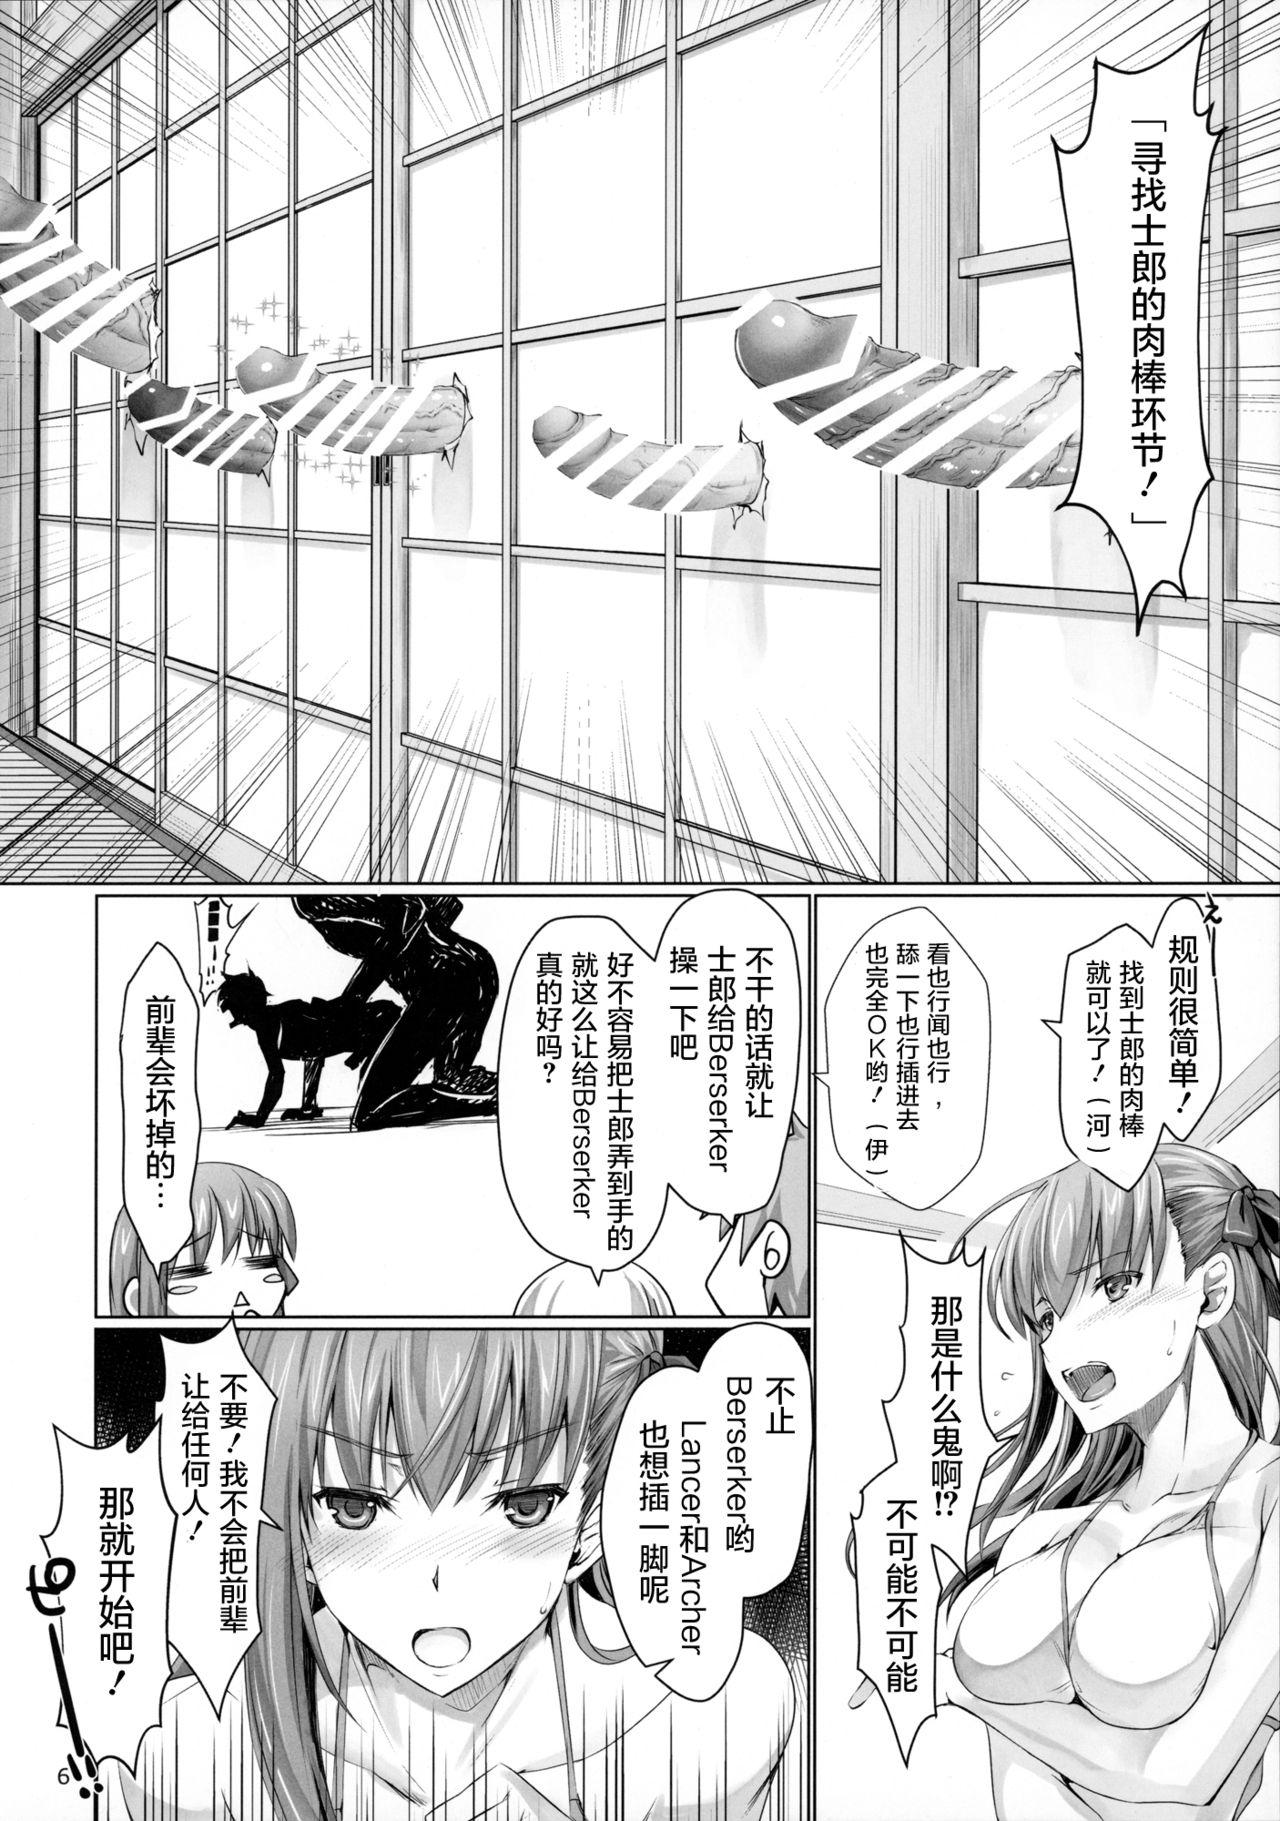 Gay Hairy I miss you. - Fate stay night Fudendo - Page 6